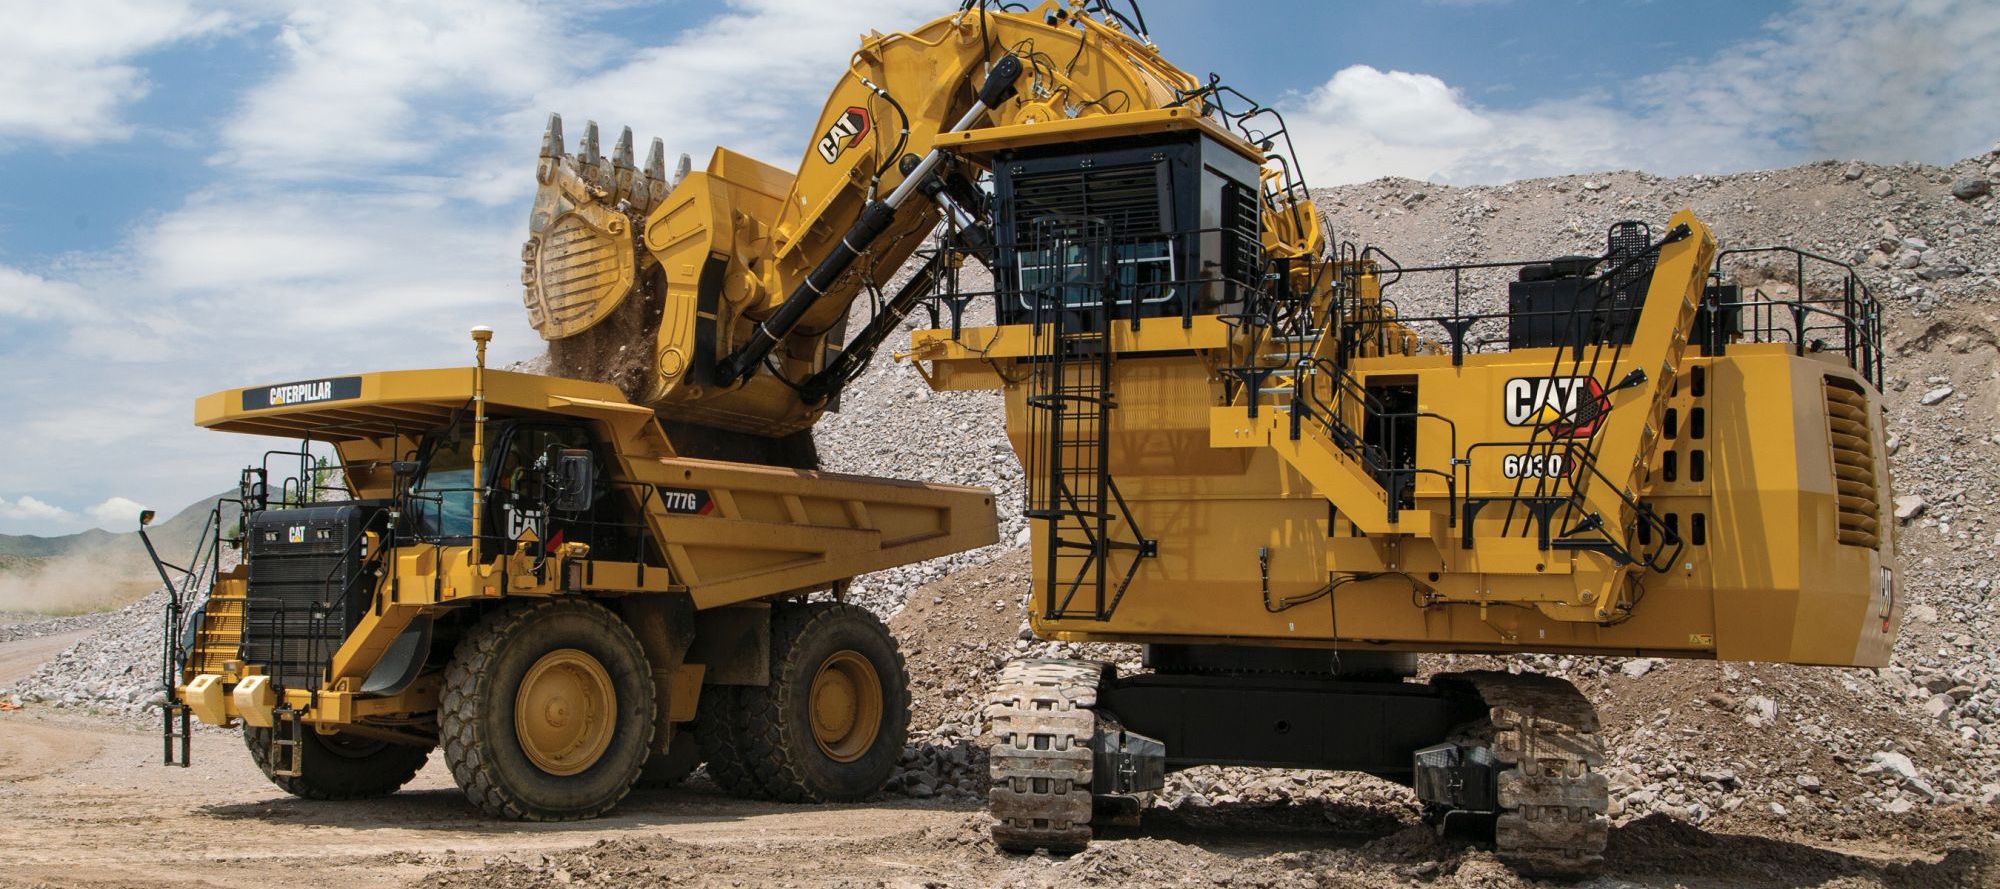 Caterpillar  Cat® Products, Parts, Services, Technology and Merchandise